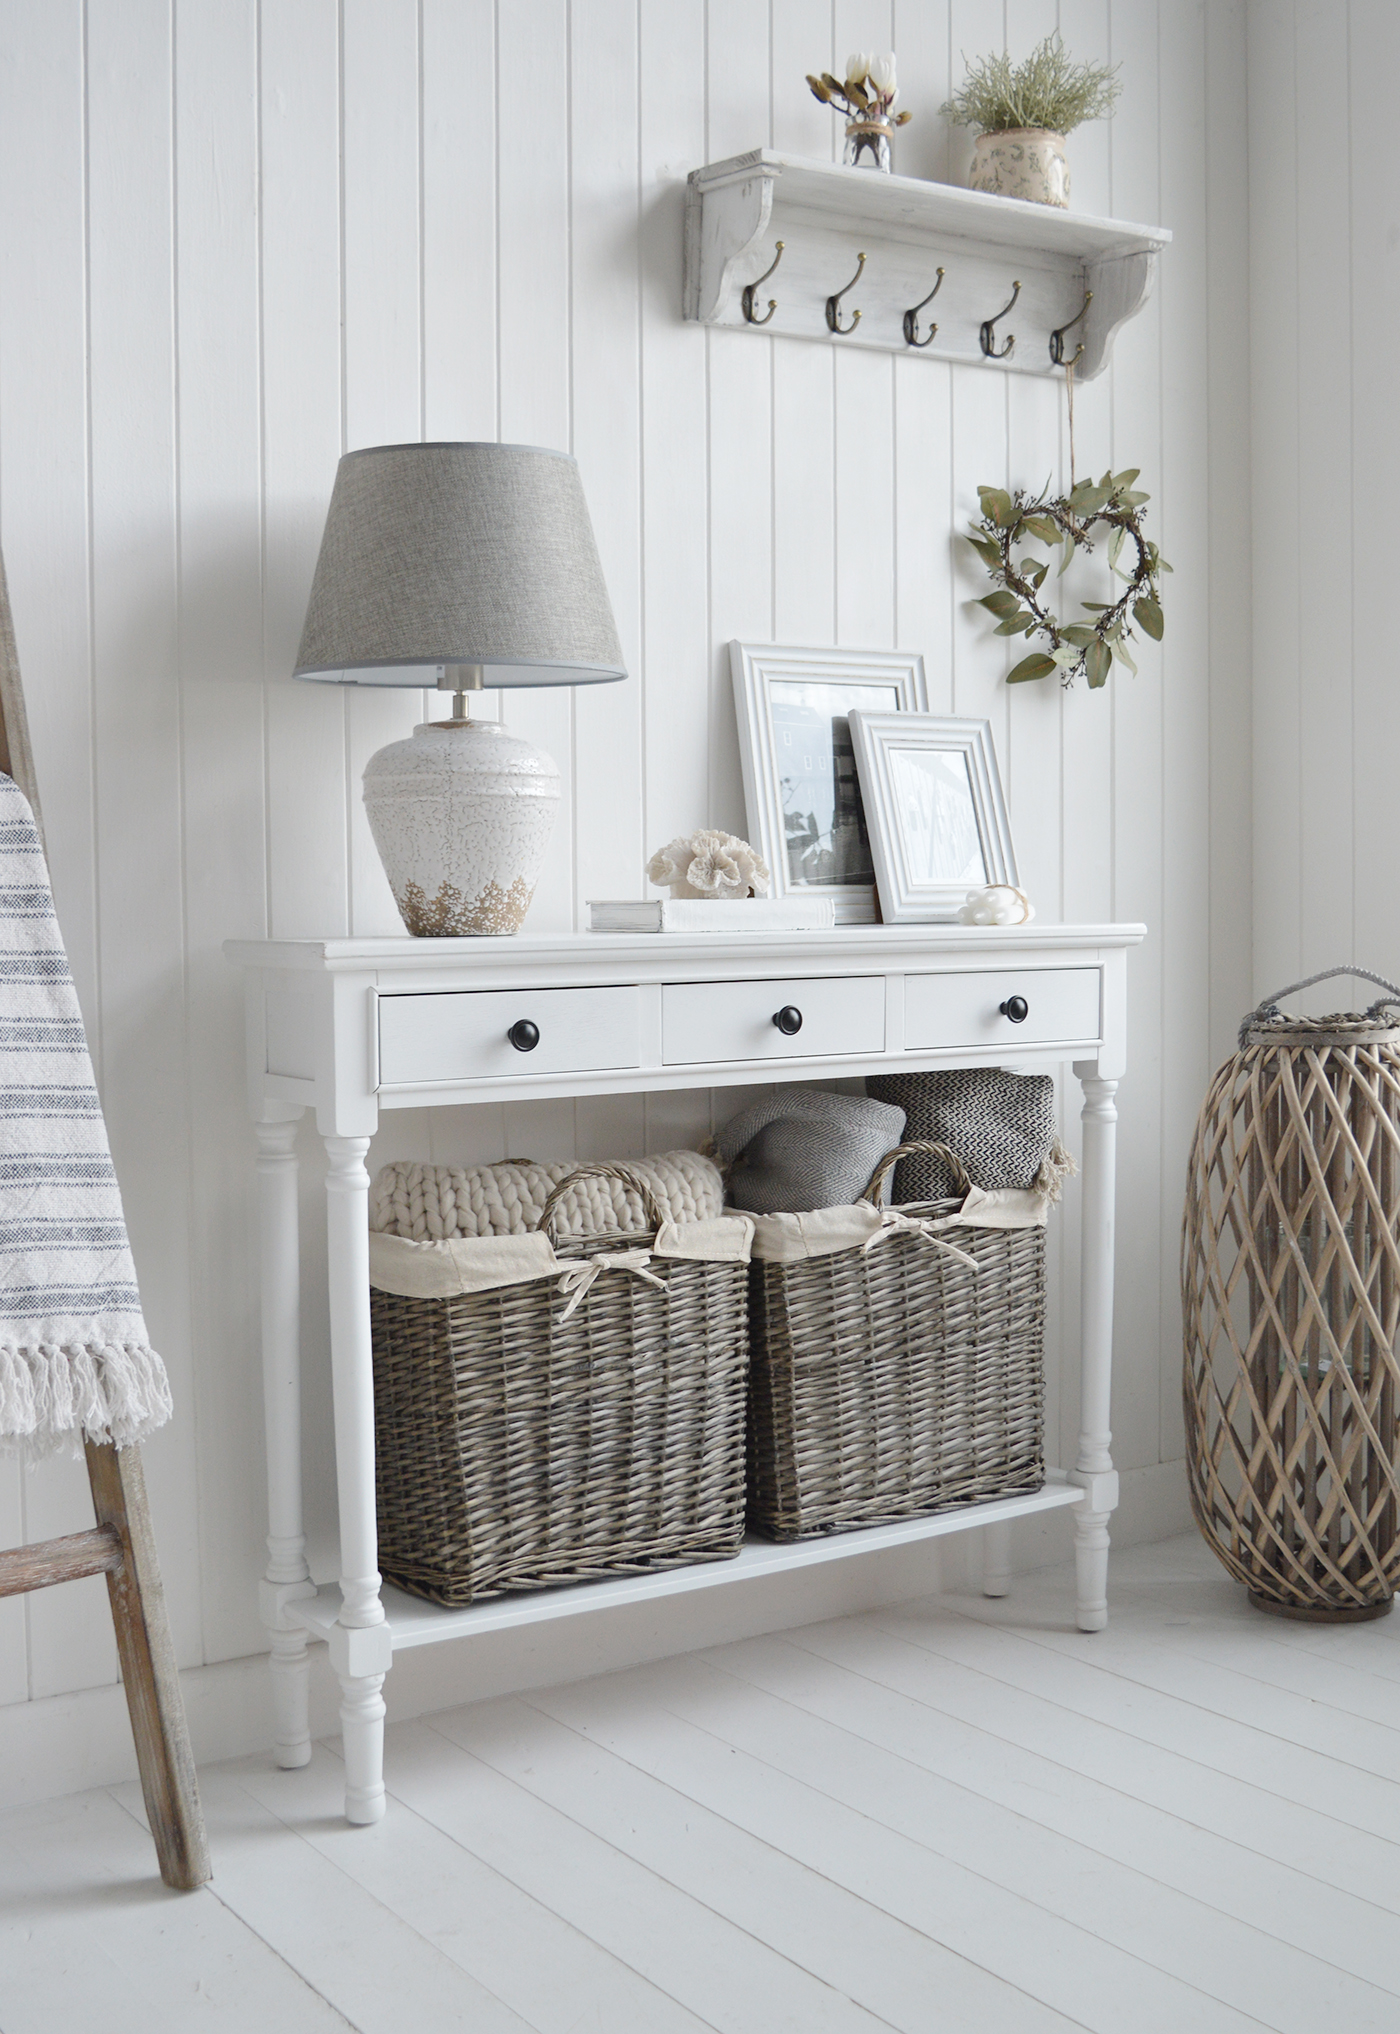 In a neutral hallway, the Georgetown console is complemented with natural baskets to provide functionality and texture making it a perfect piece for a modern country home